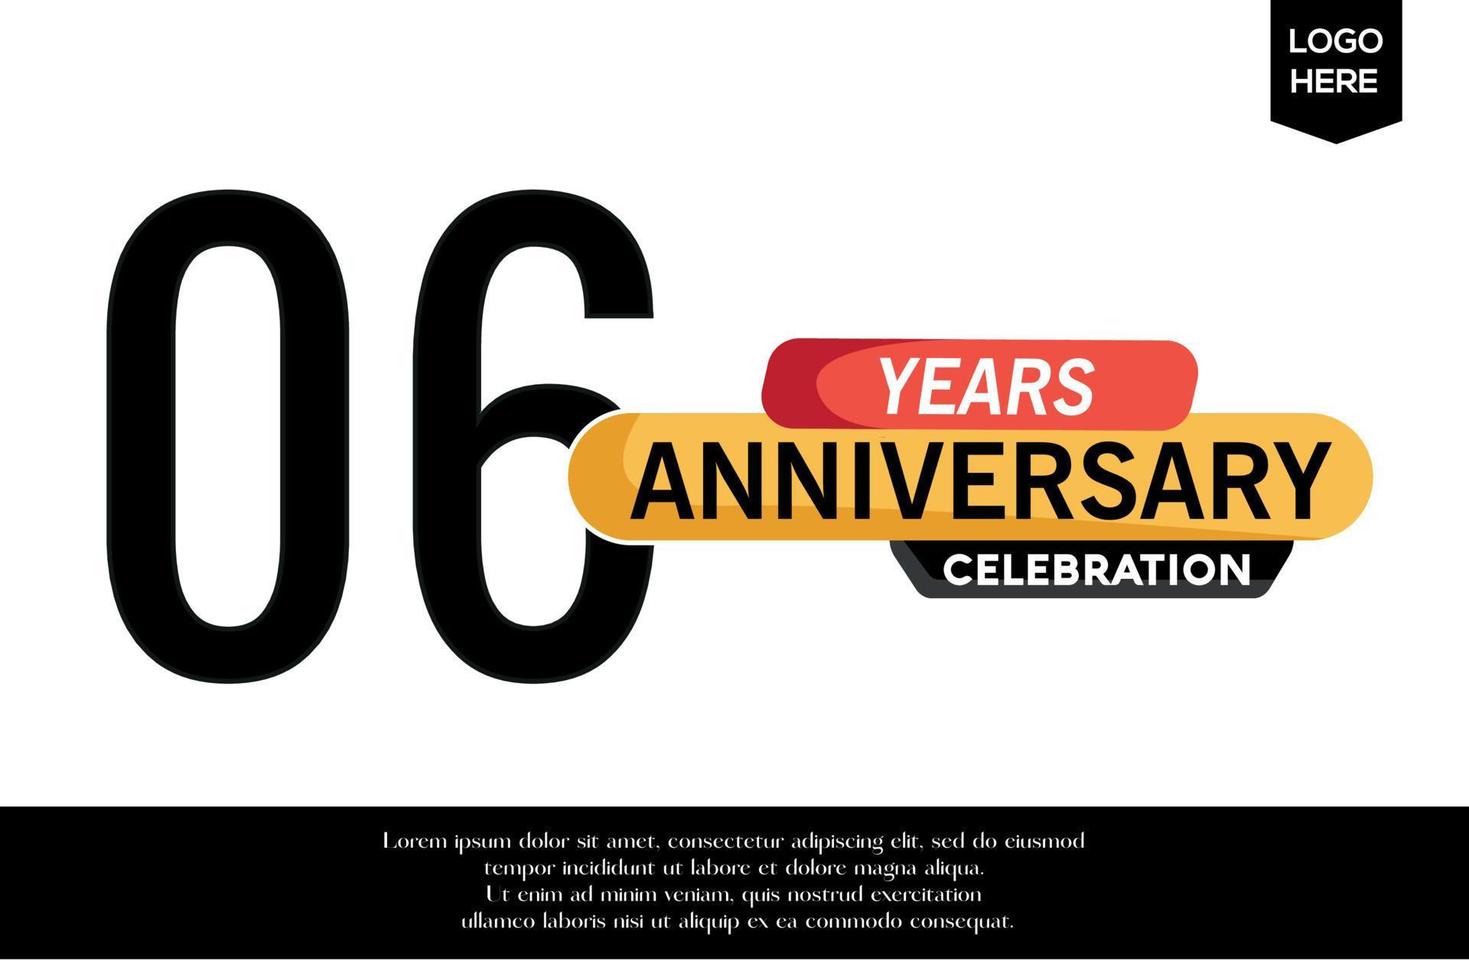 06th anniversary celebration logotype black yellow colored with text in gray color isolated on white background vector template design